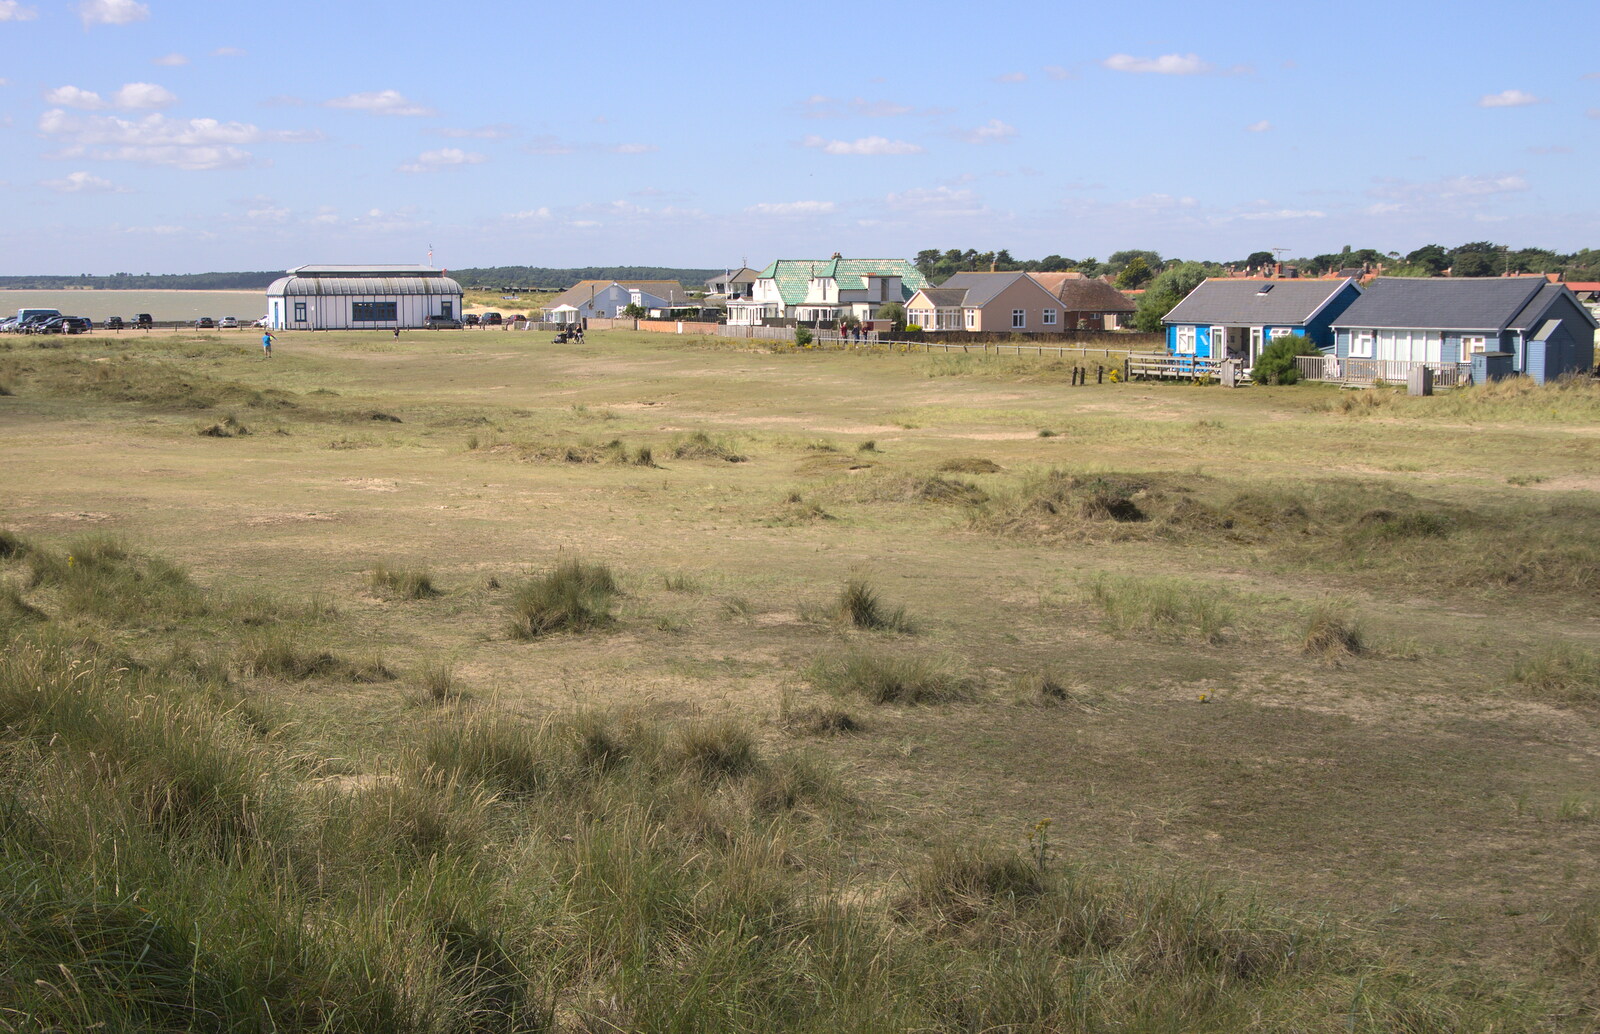 Behind the dunes from The Danger of Trees: A Camping (Mis)adventure - Southwold, Suffolk - 3rd August 2015